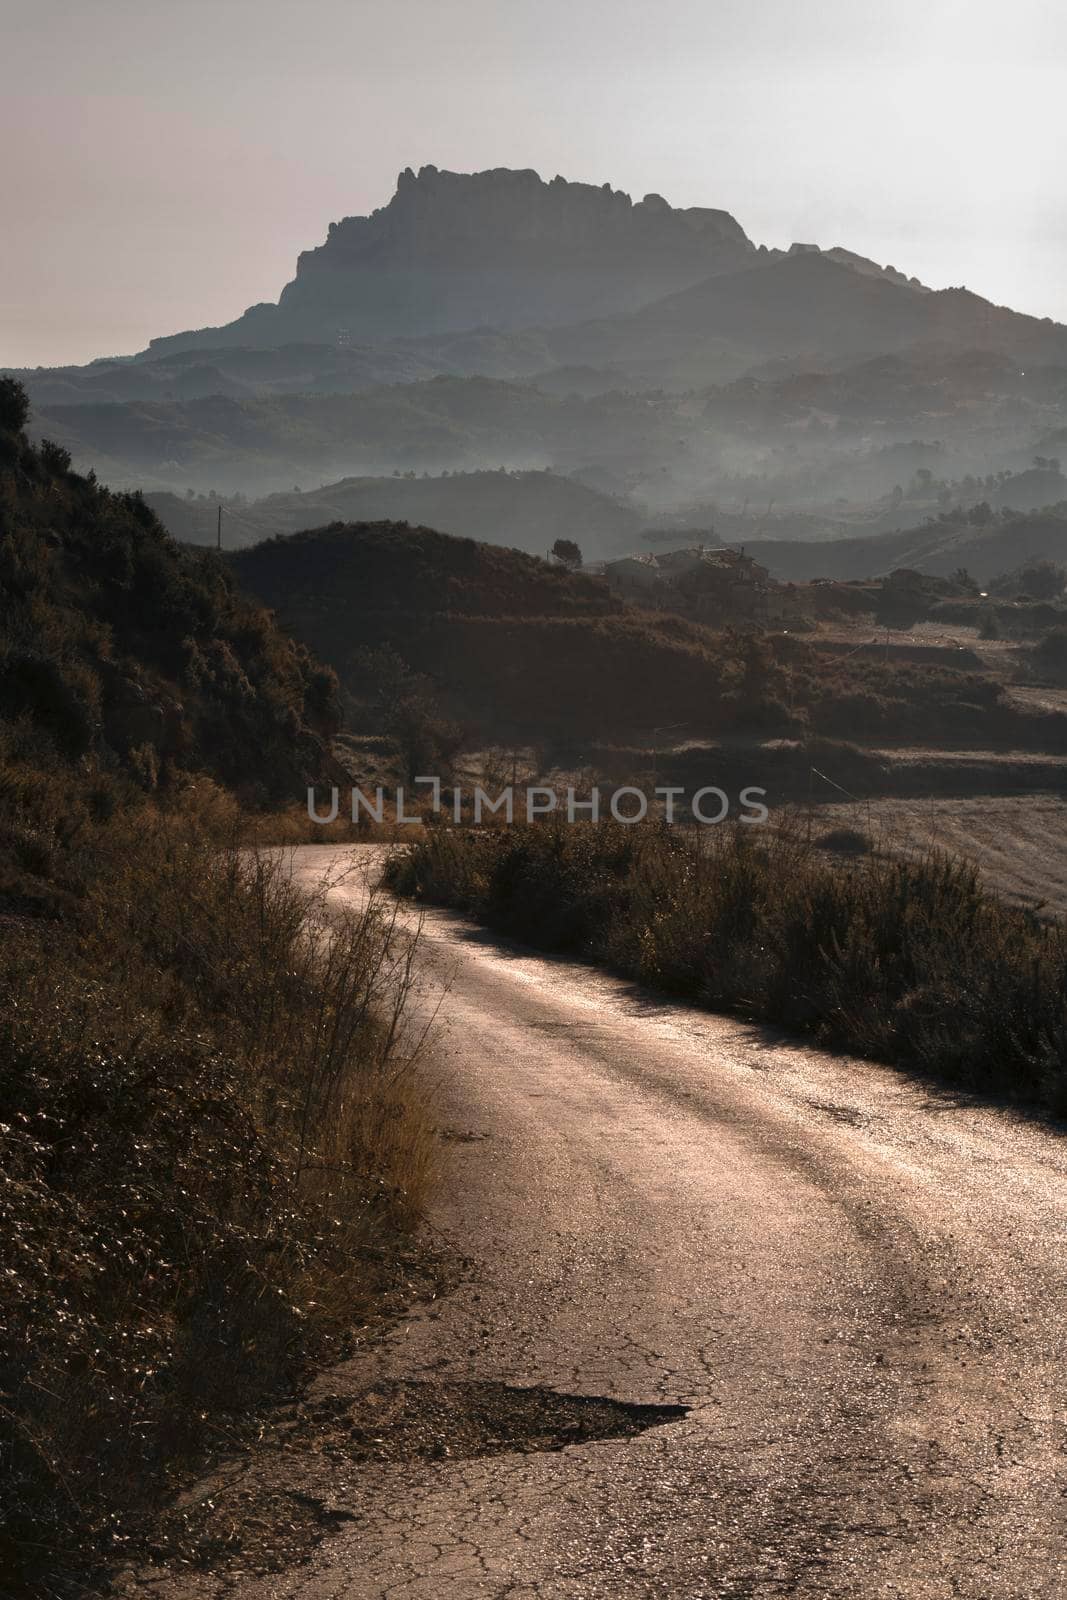 Landscape showing Montserrat mountain at the end of a path in a misty morning view